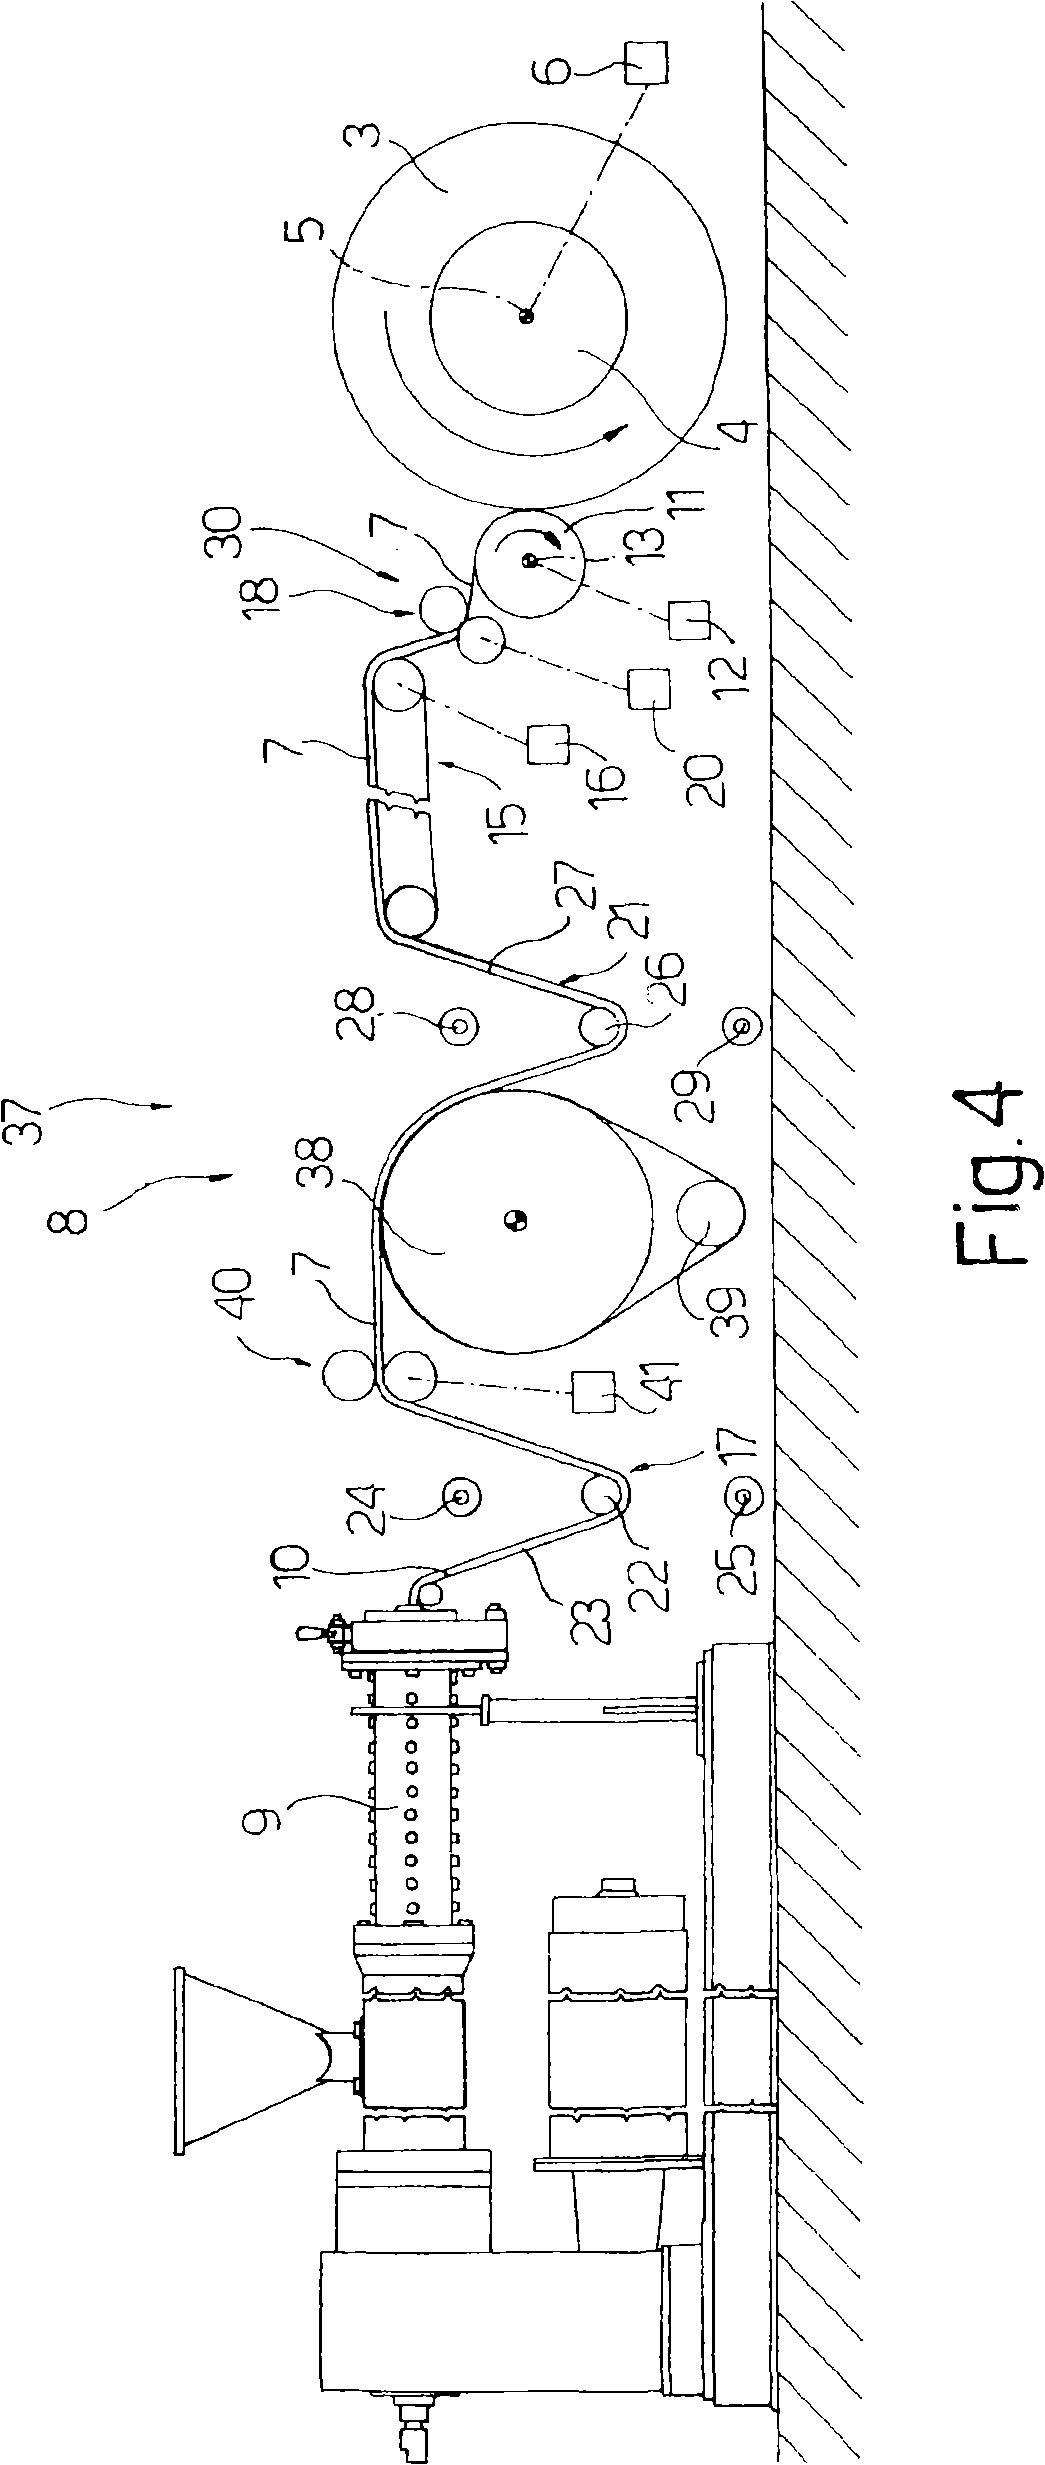 Method and machine for rubberizing an annular surface of a body